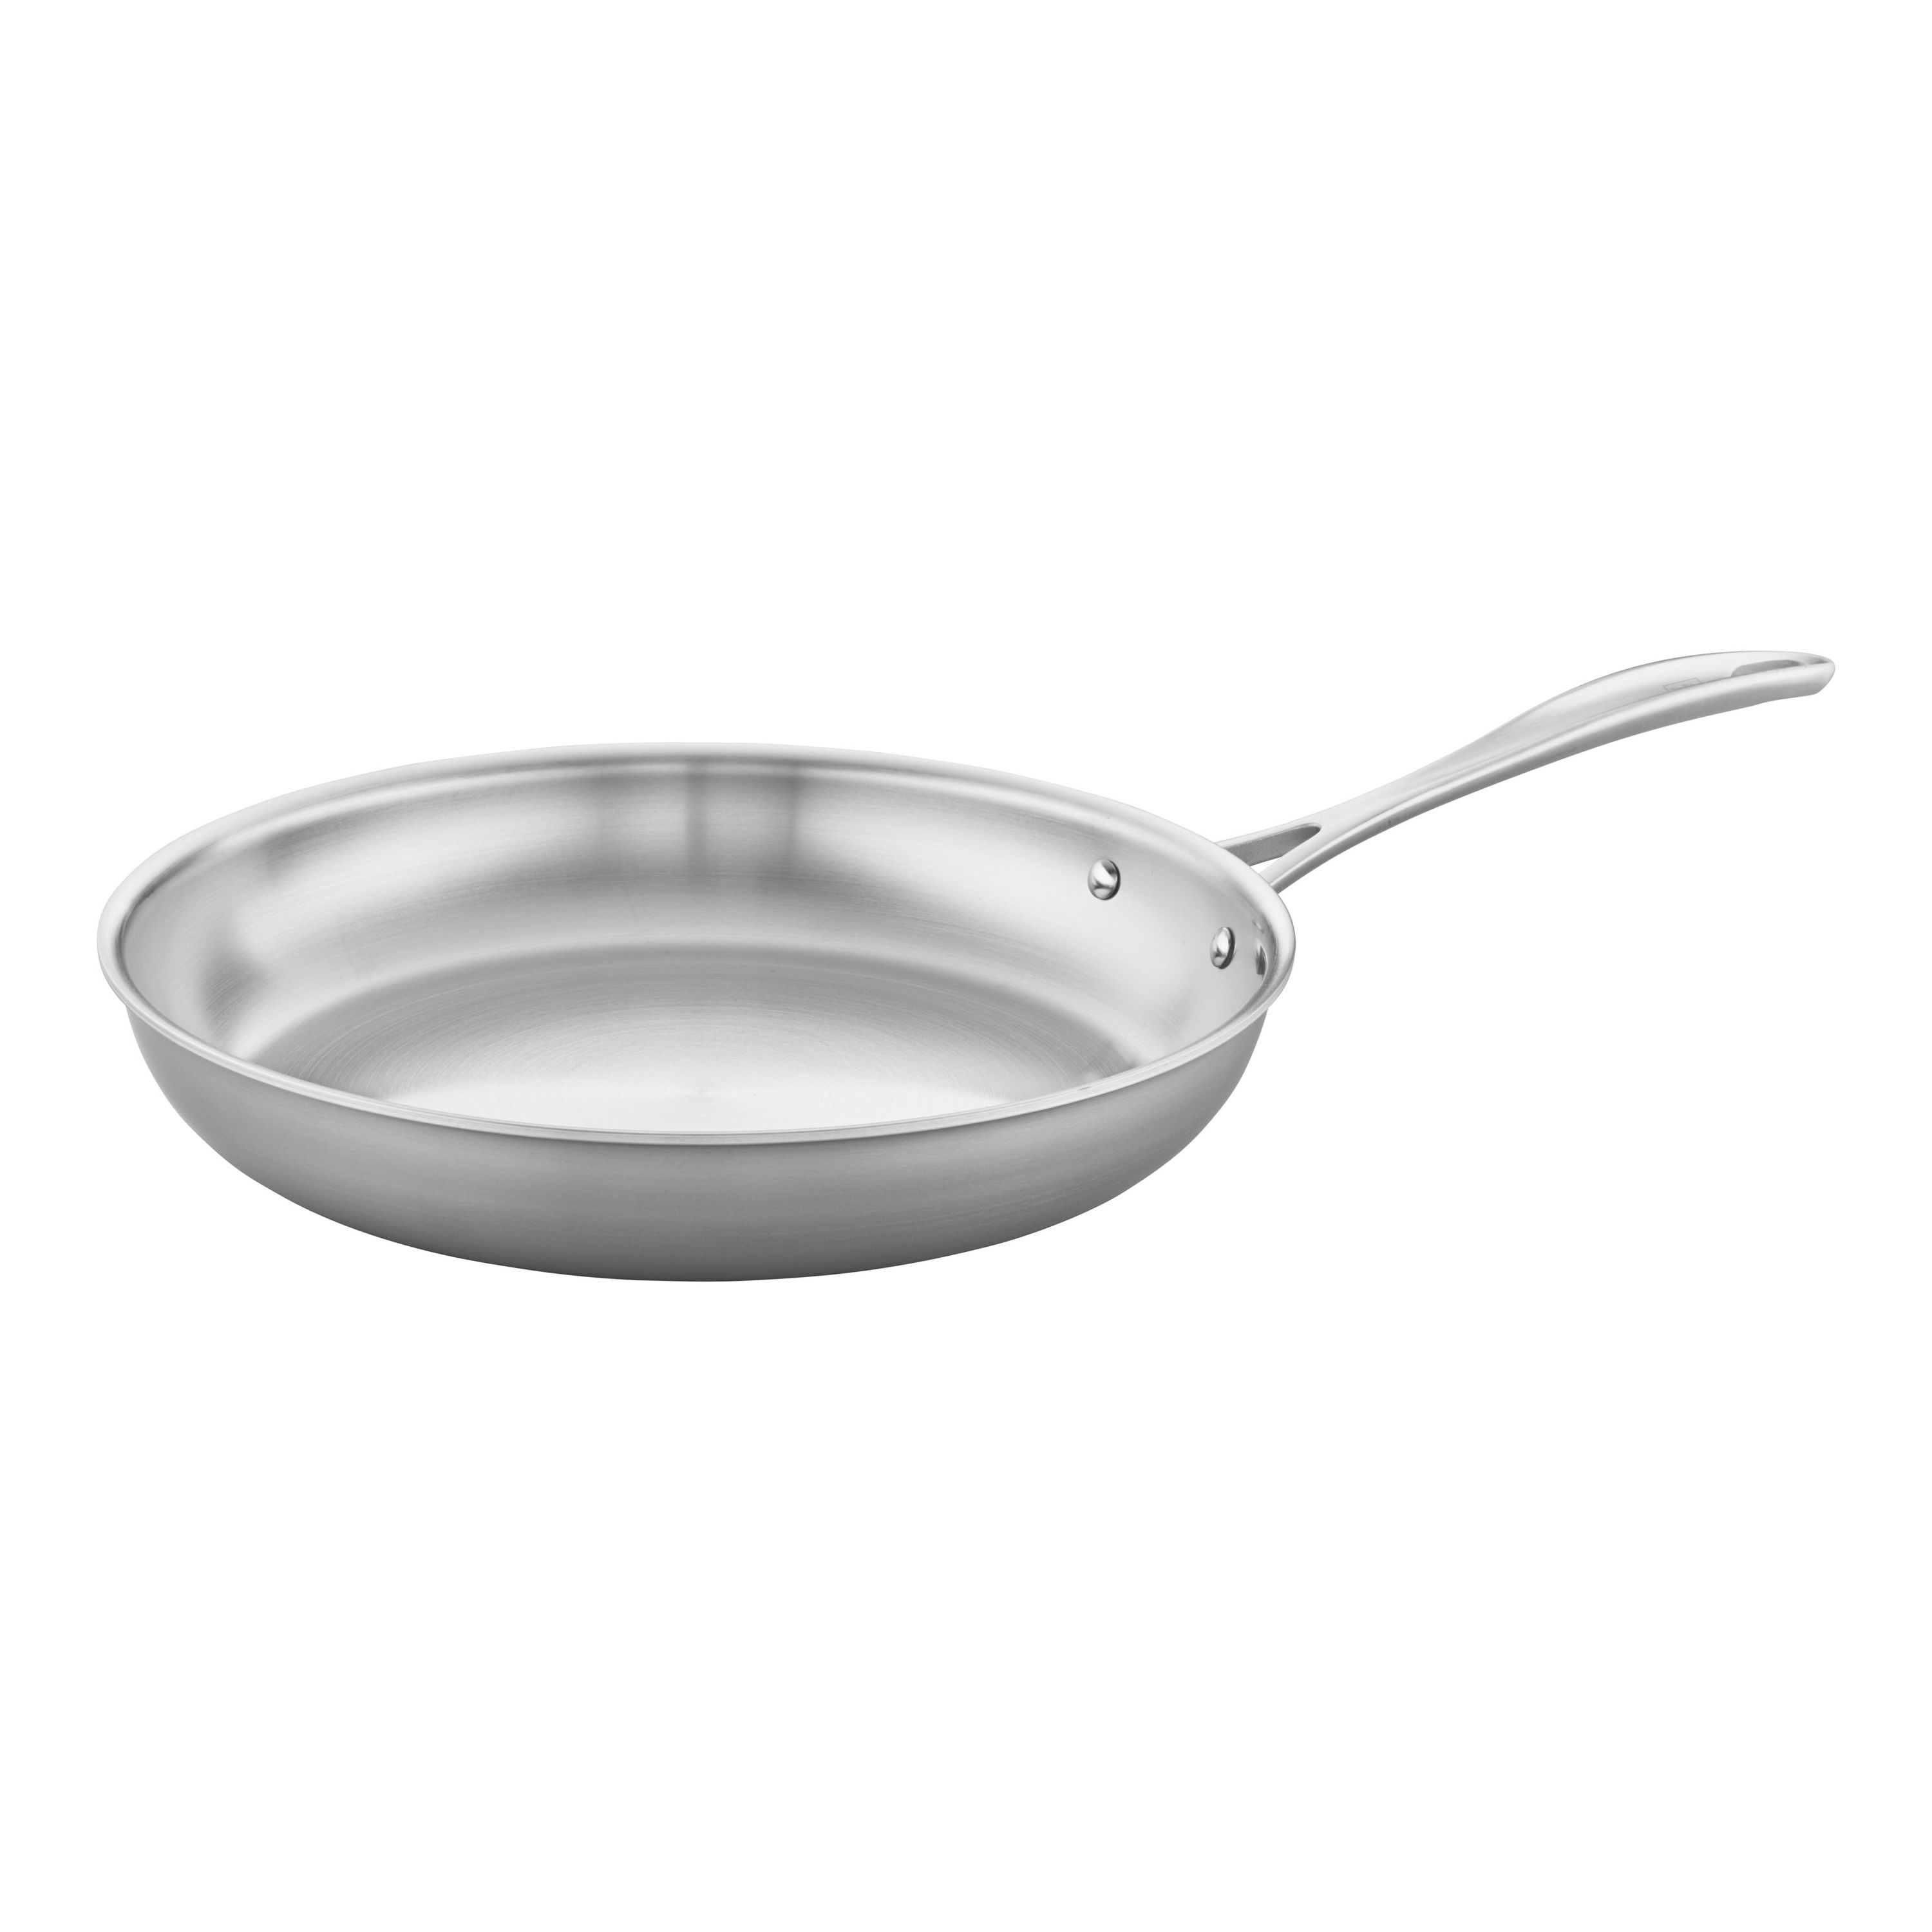 Zwilling Spirit 3-Ply 8 Stainless Steel Fry Pan